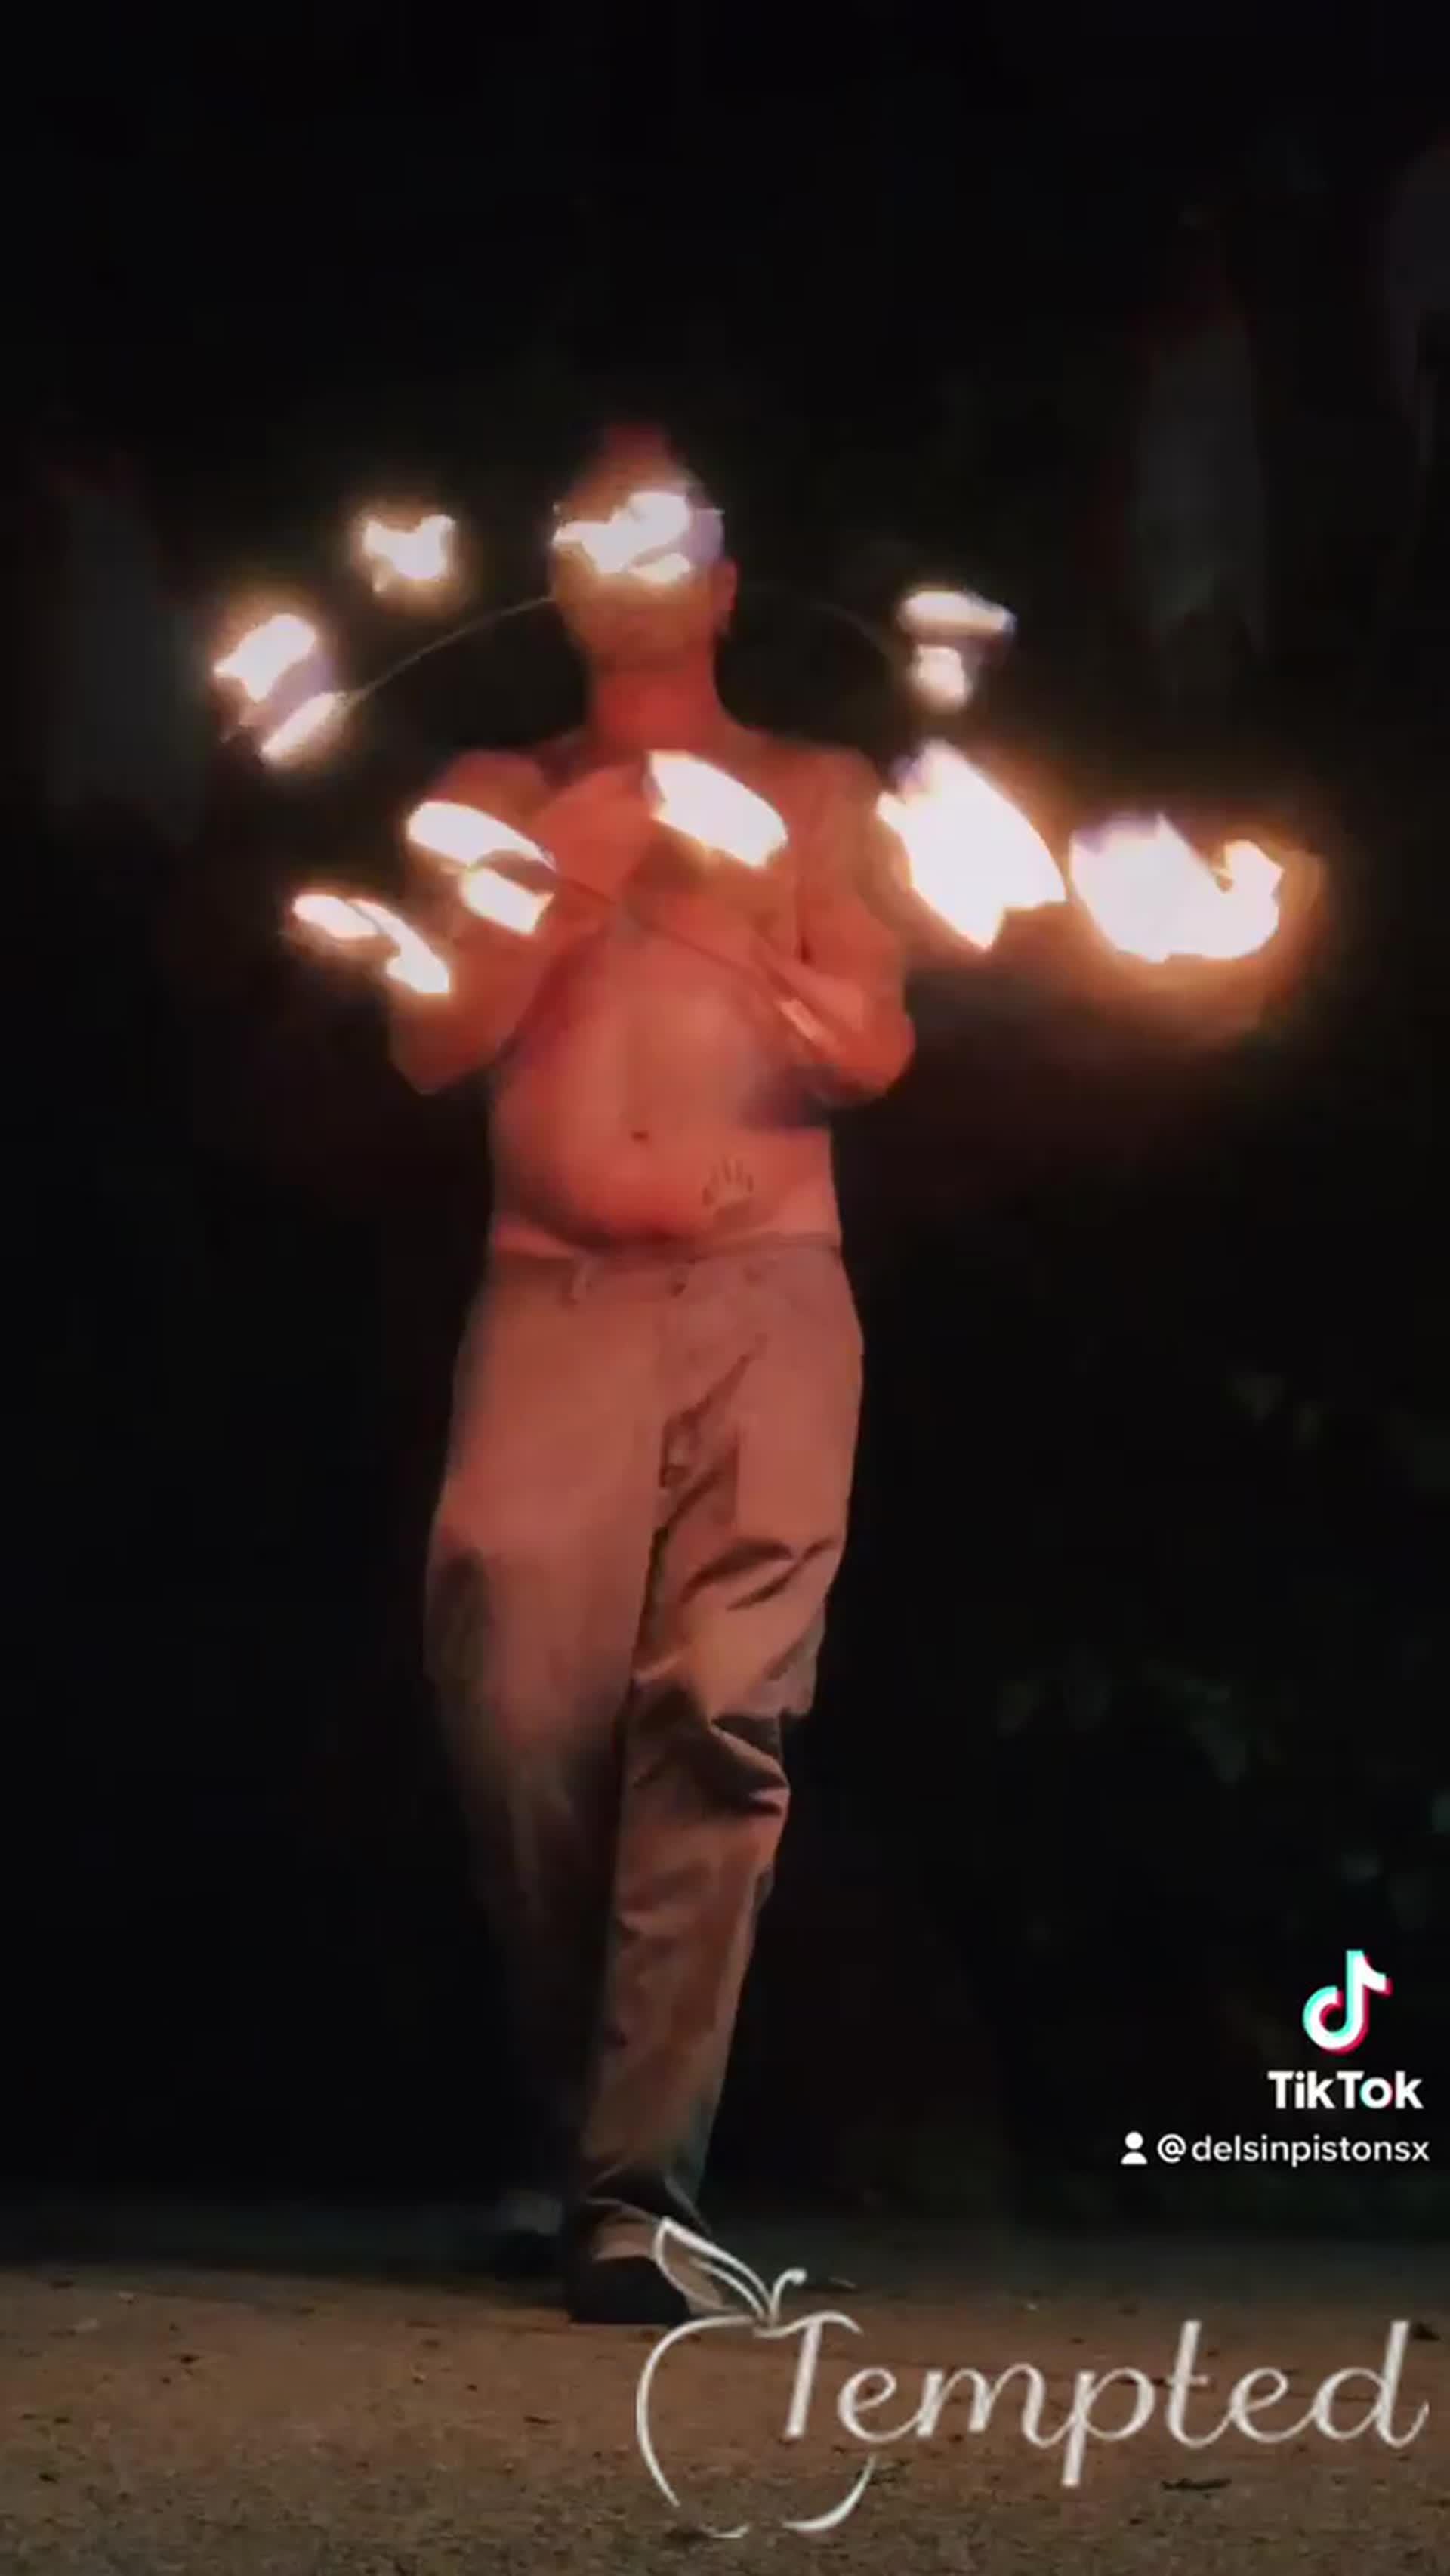 Fun with fire